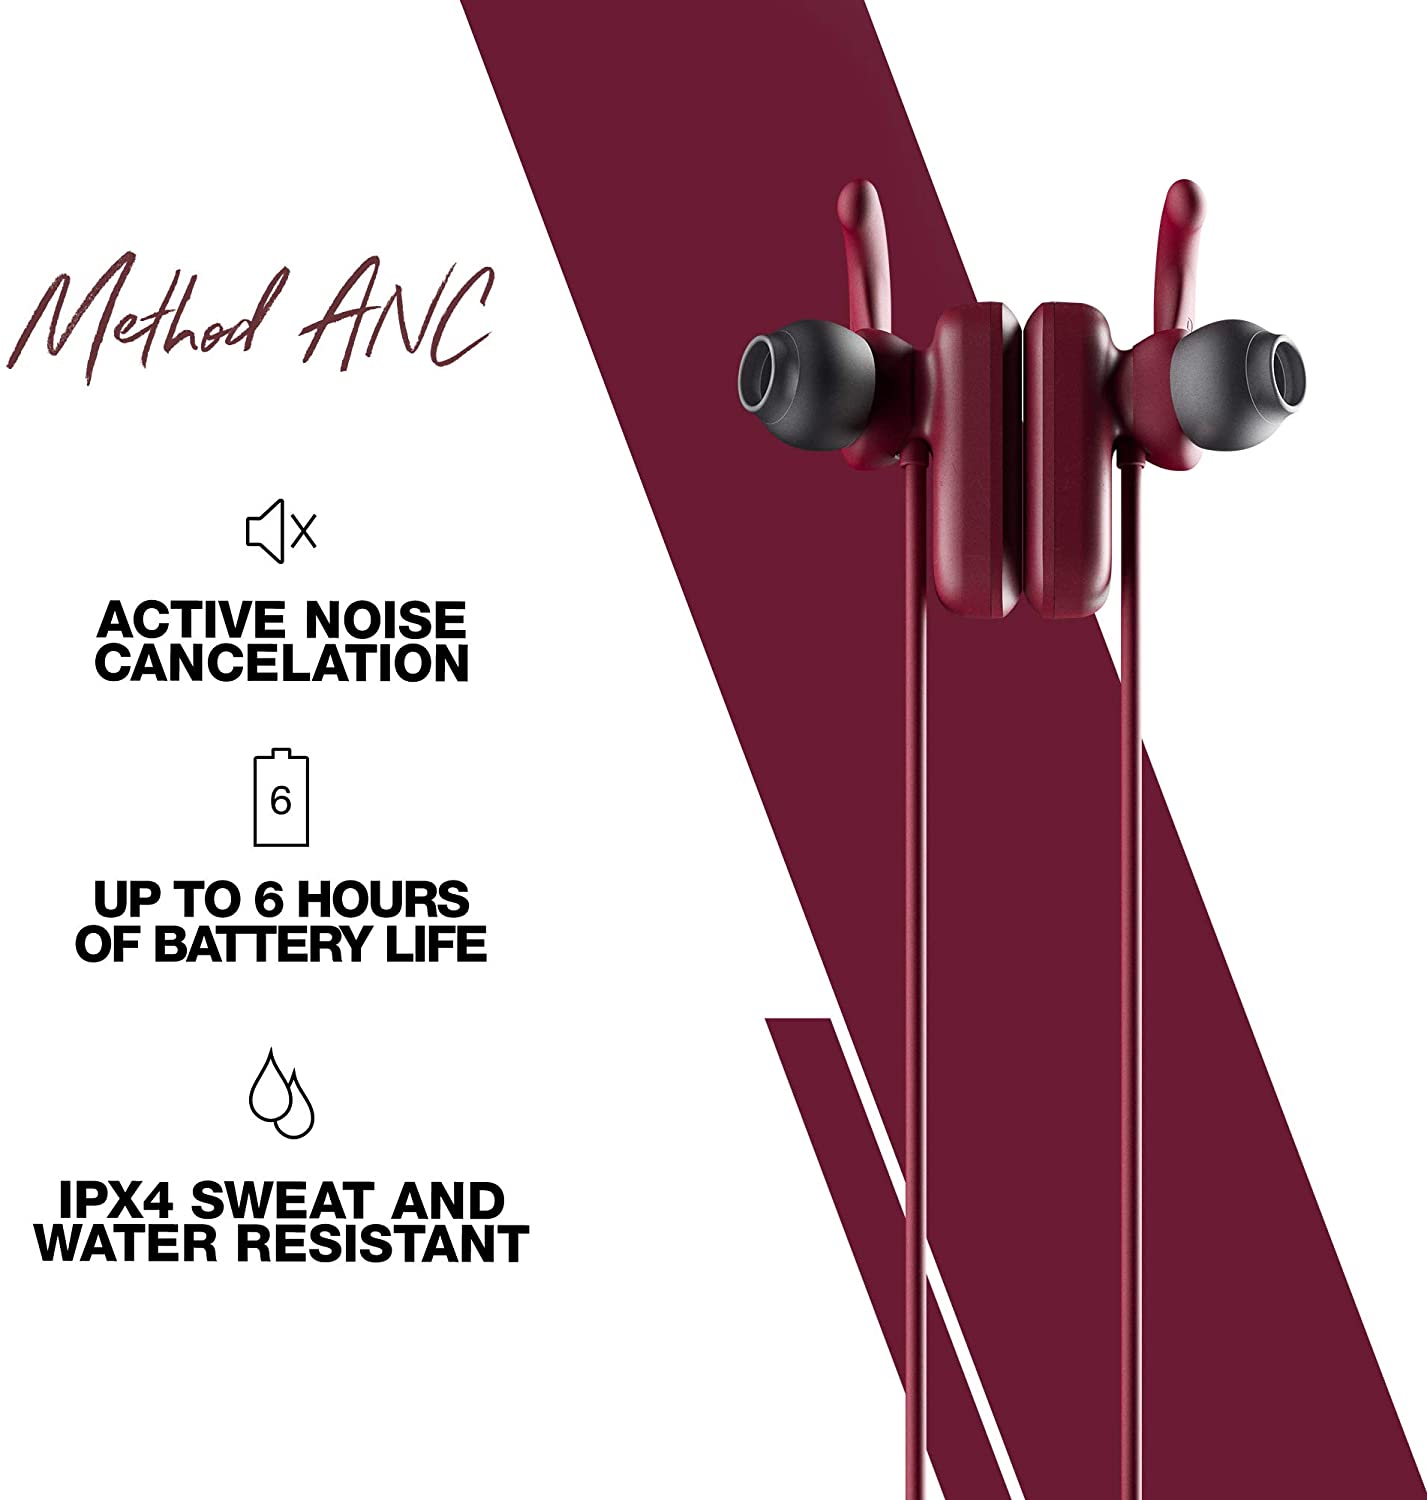 Skullcandy Method ANC IPX4 Sweat and Water Resistant Wireless In-Ear Earbuds with Magnetic Buds and Microphone (BLACK, RED)